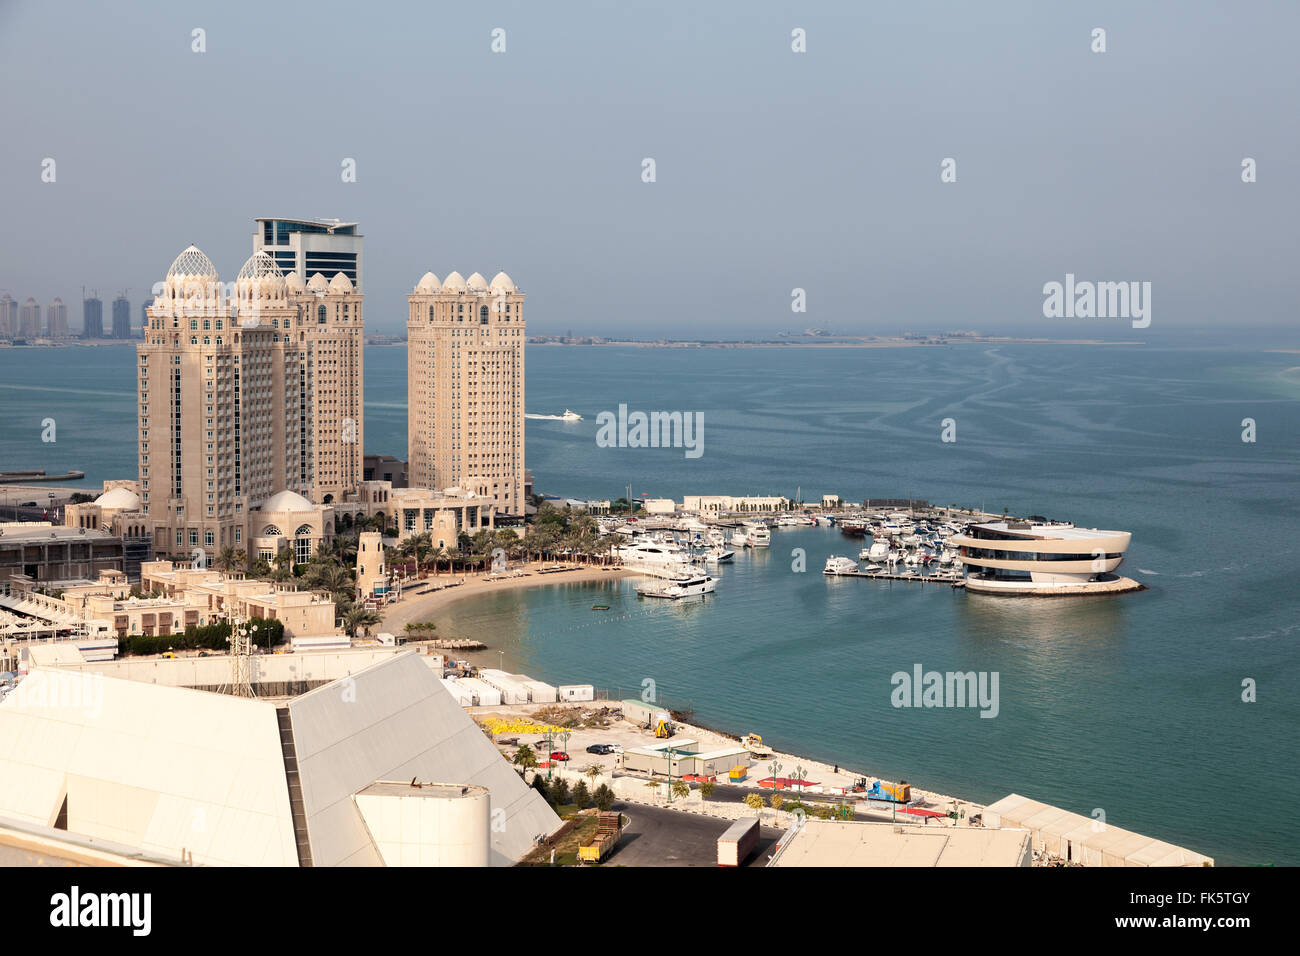 West Bay waterfront buildings in Doha, Qatar Stock Photo